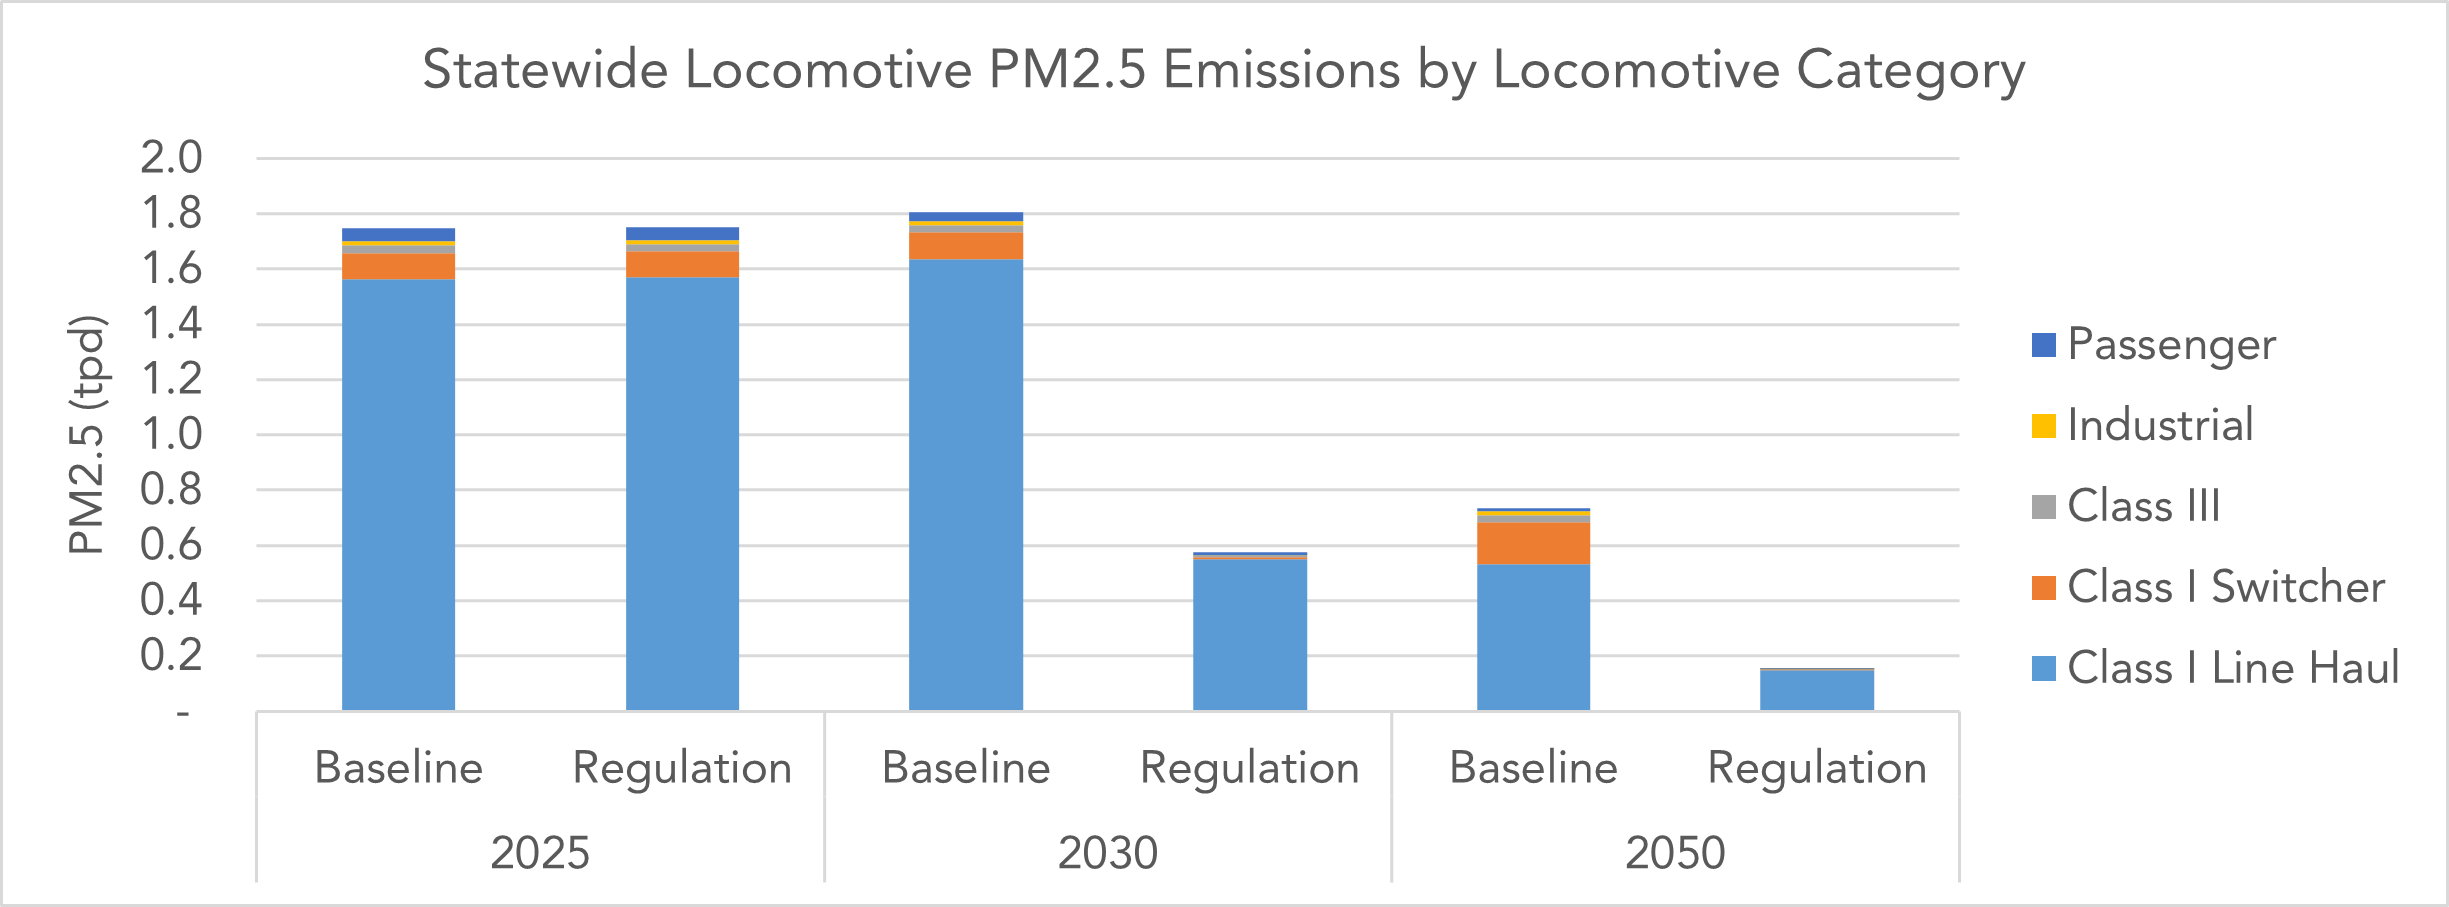 bar chart showing the effect of the regulation of the PM emission of the state's locomotives. The chart shows a reduction of 91% of the PM emissions by 2050 under the proposed regulation.